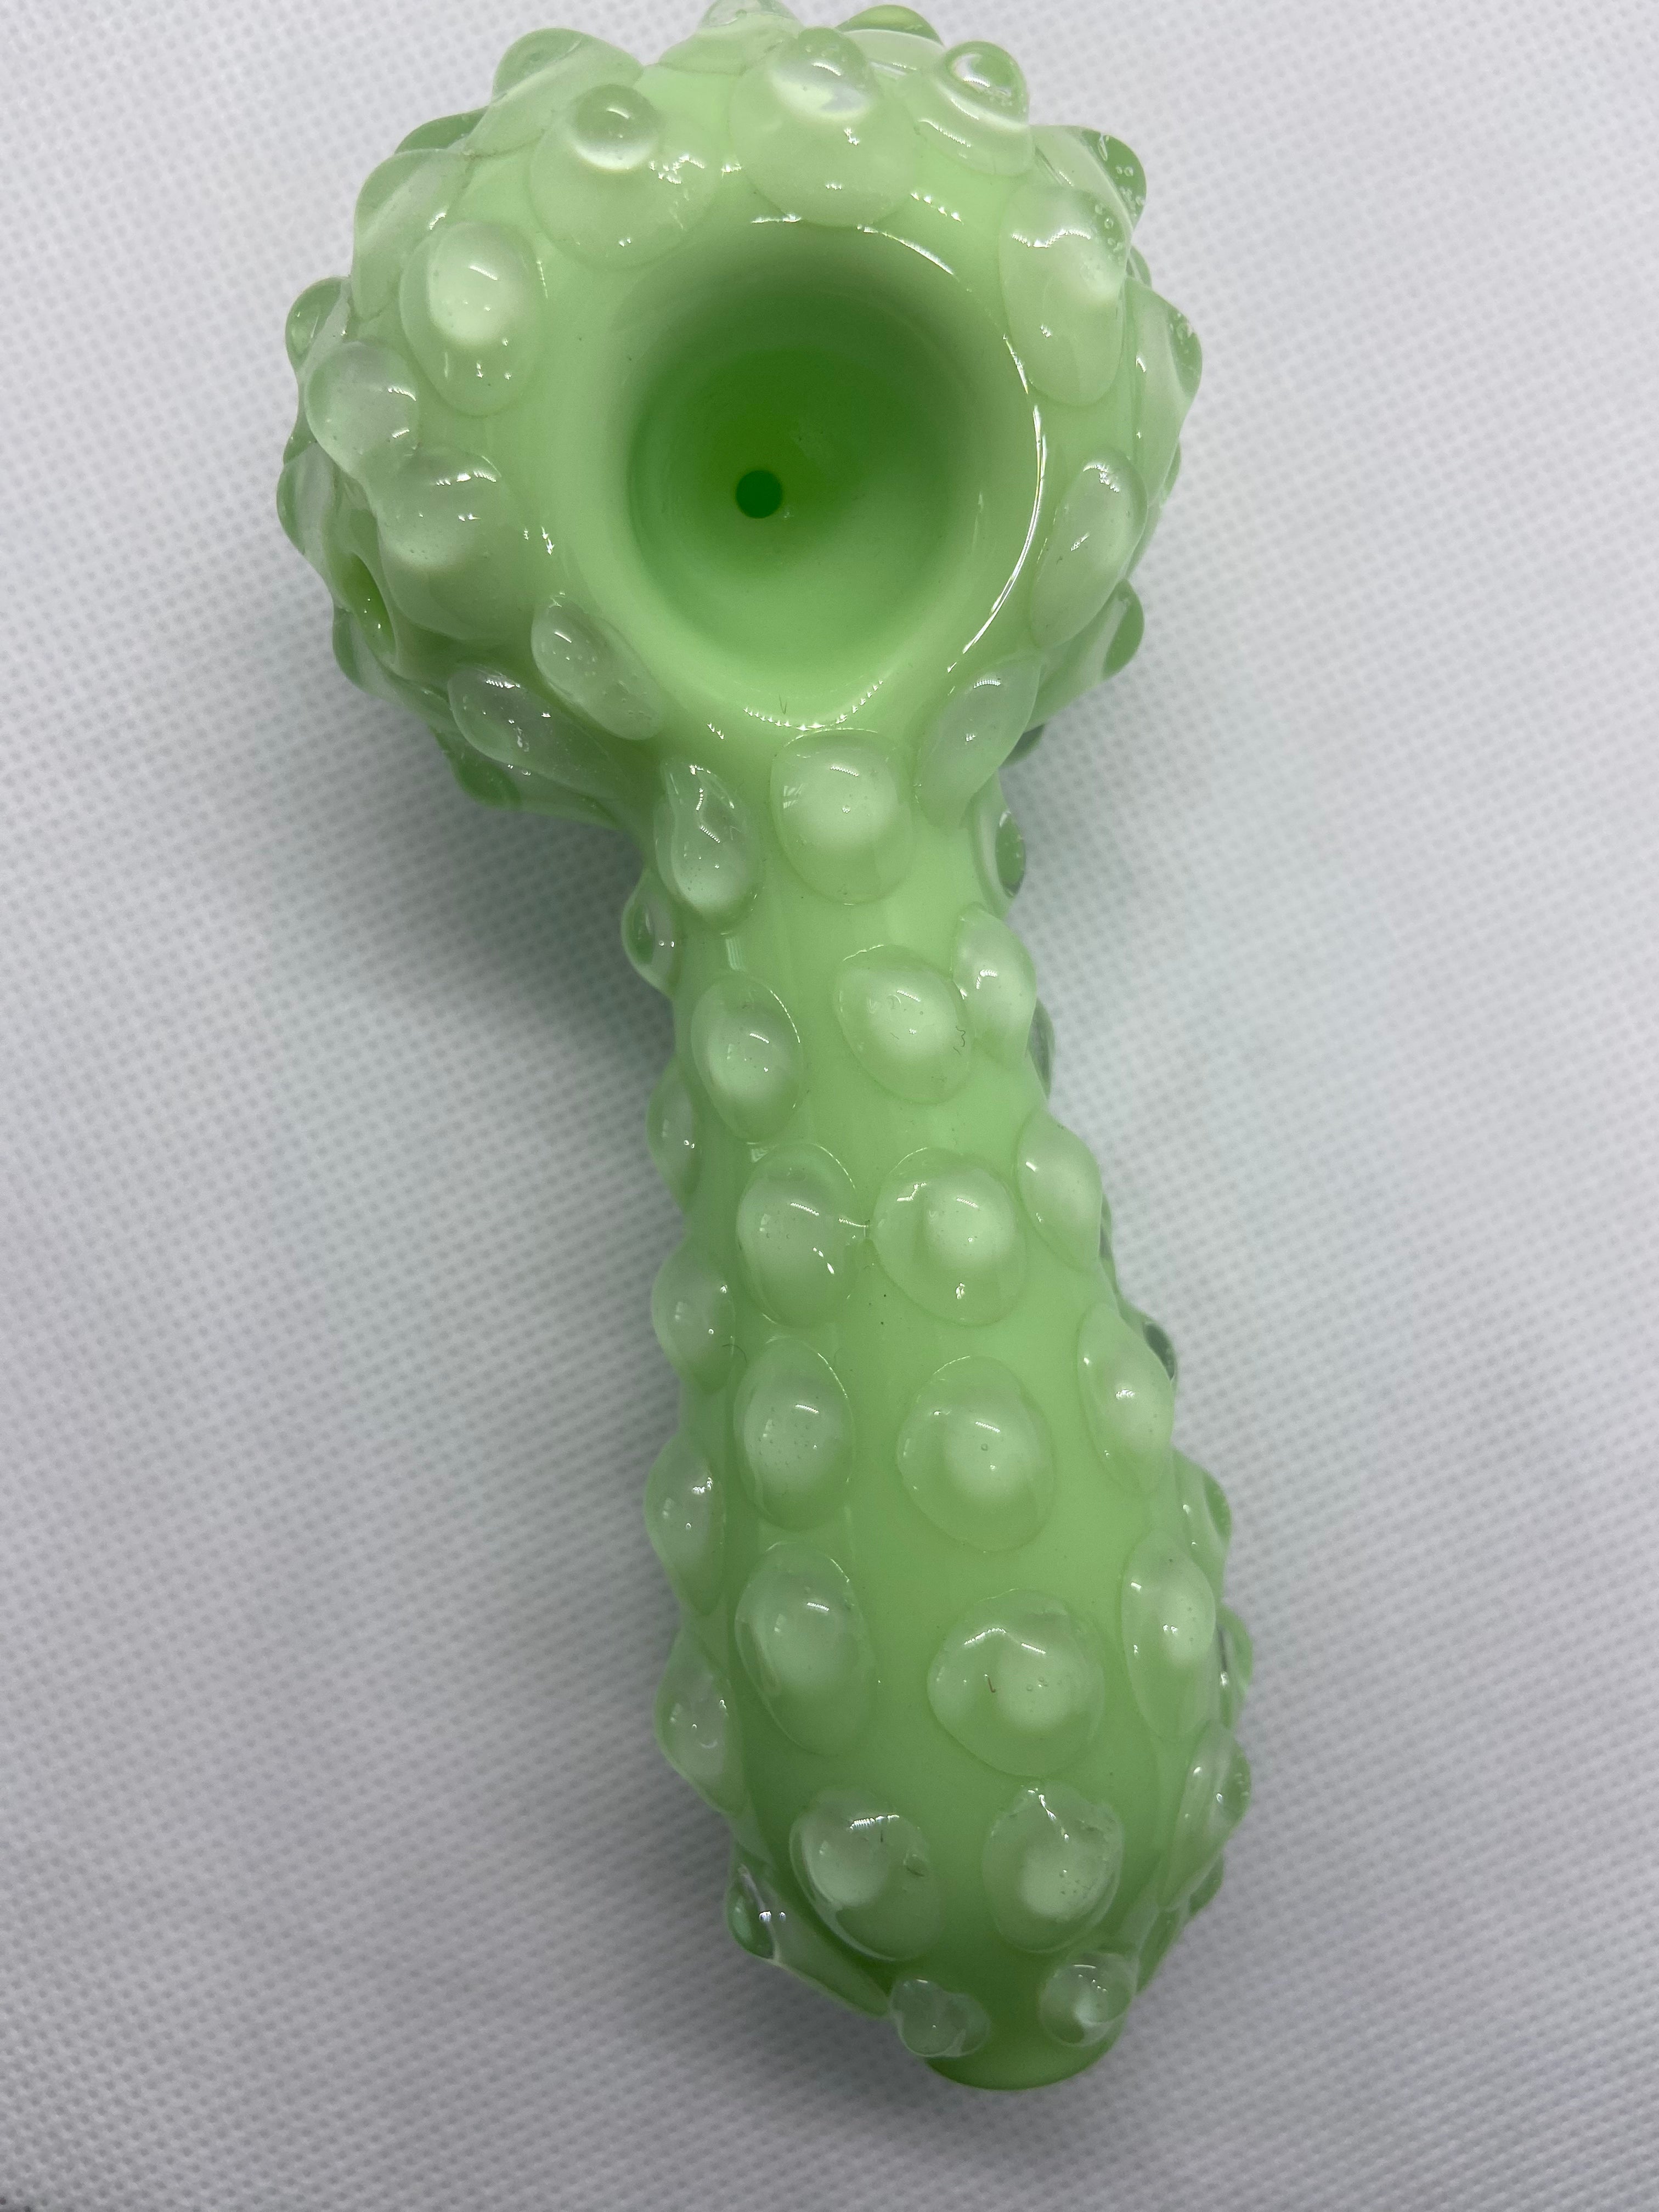 Slime spike spoon - Limitless Puff